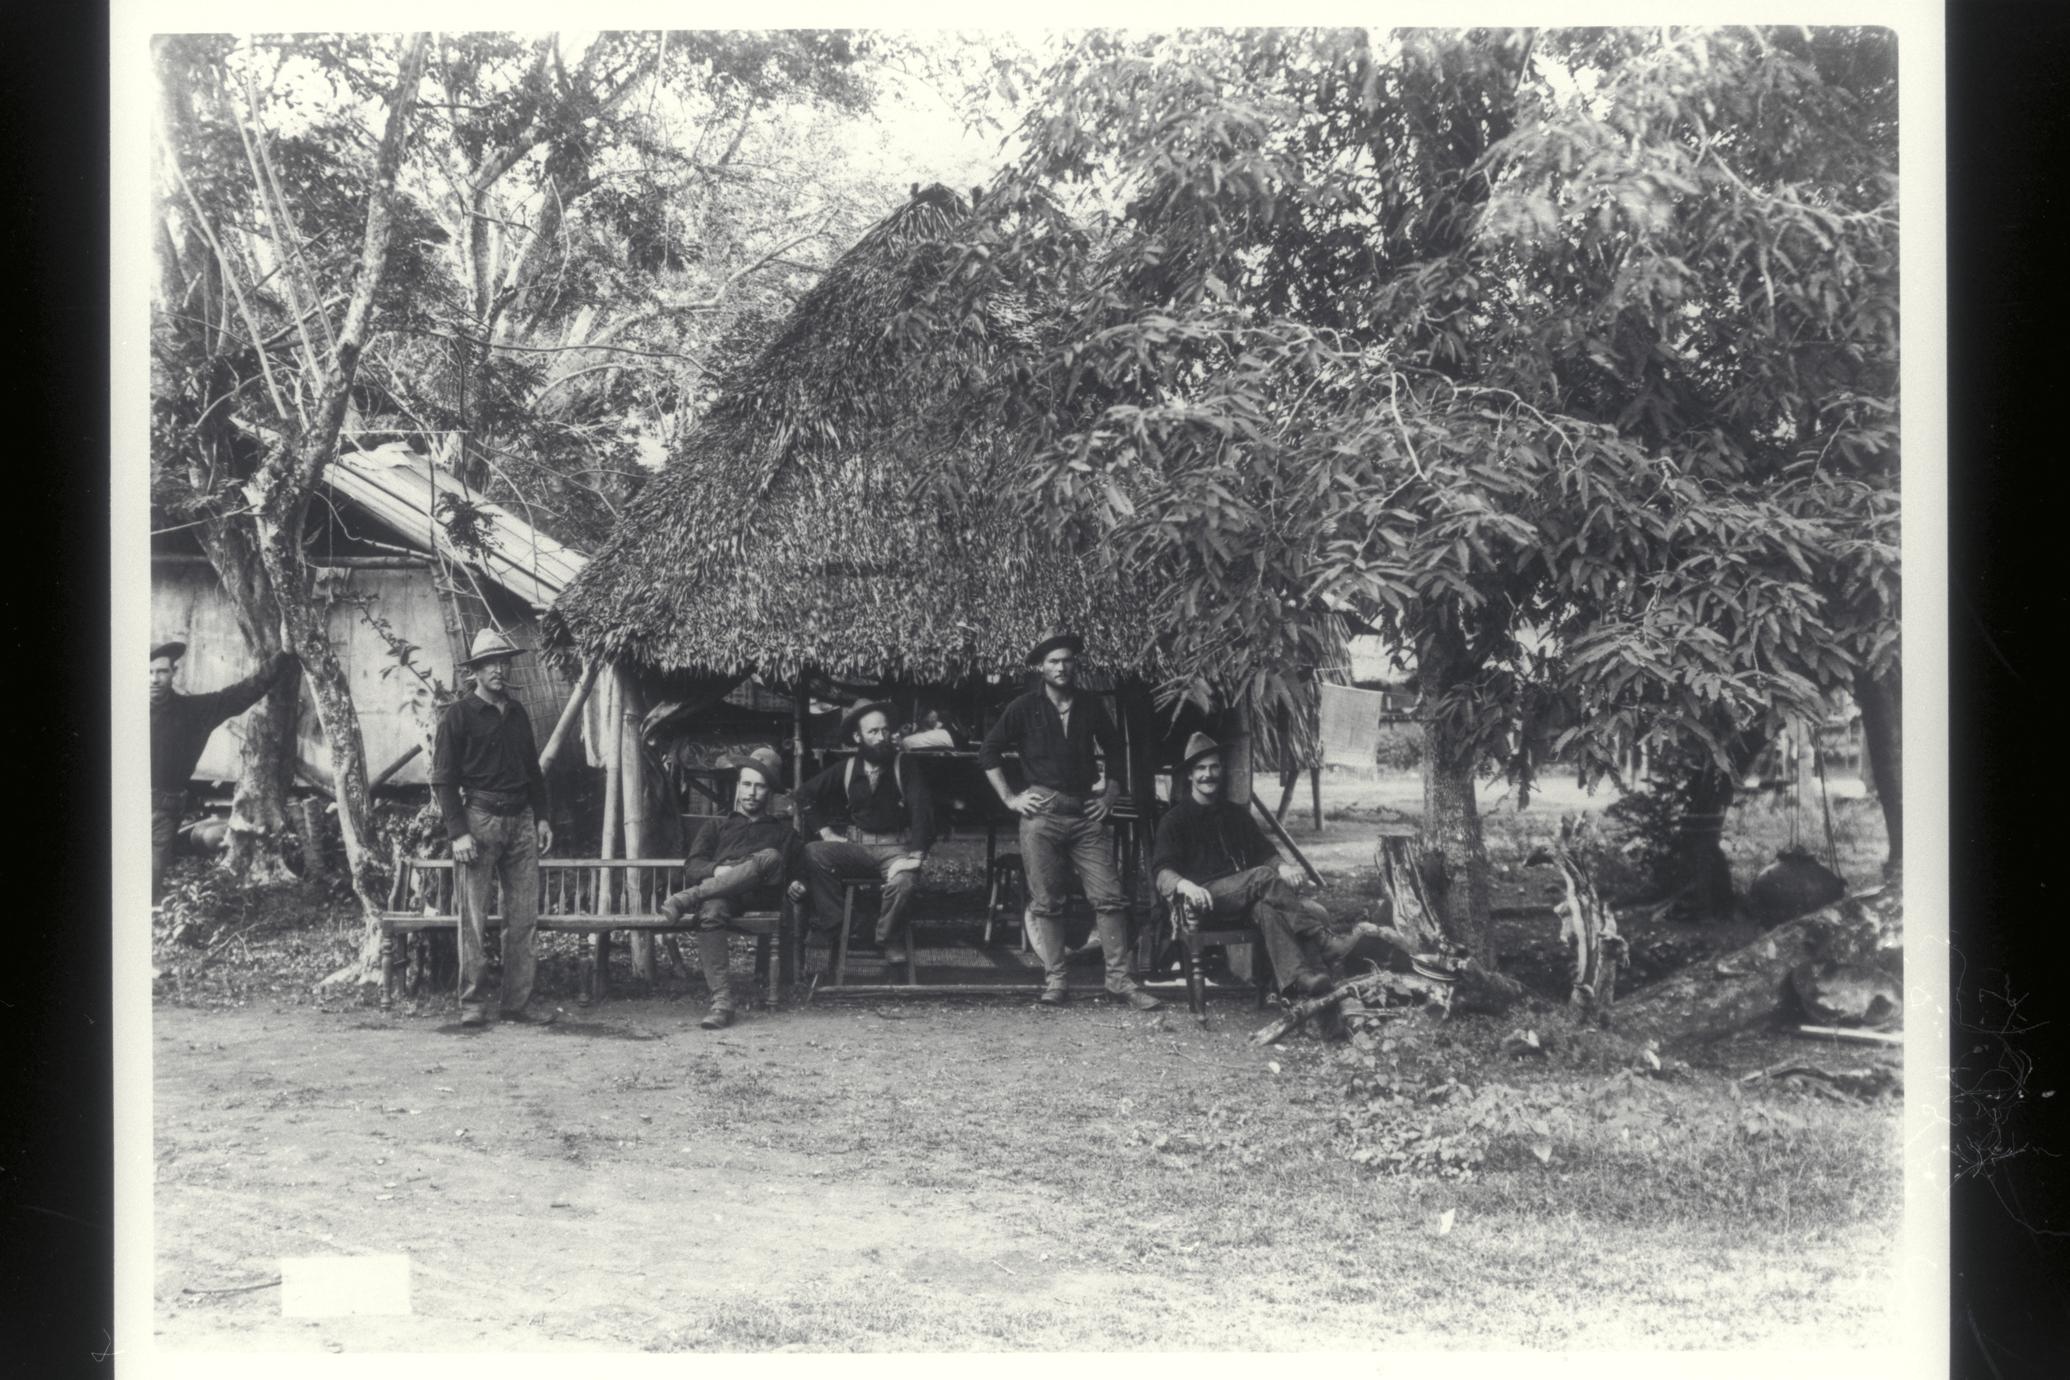 Six U.S. soldiers relax next to a thatched hut and shade trees, 1899